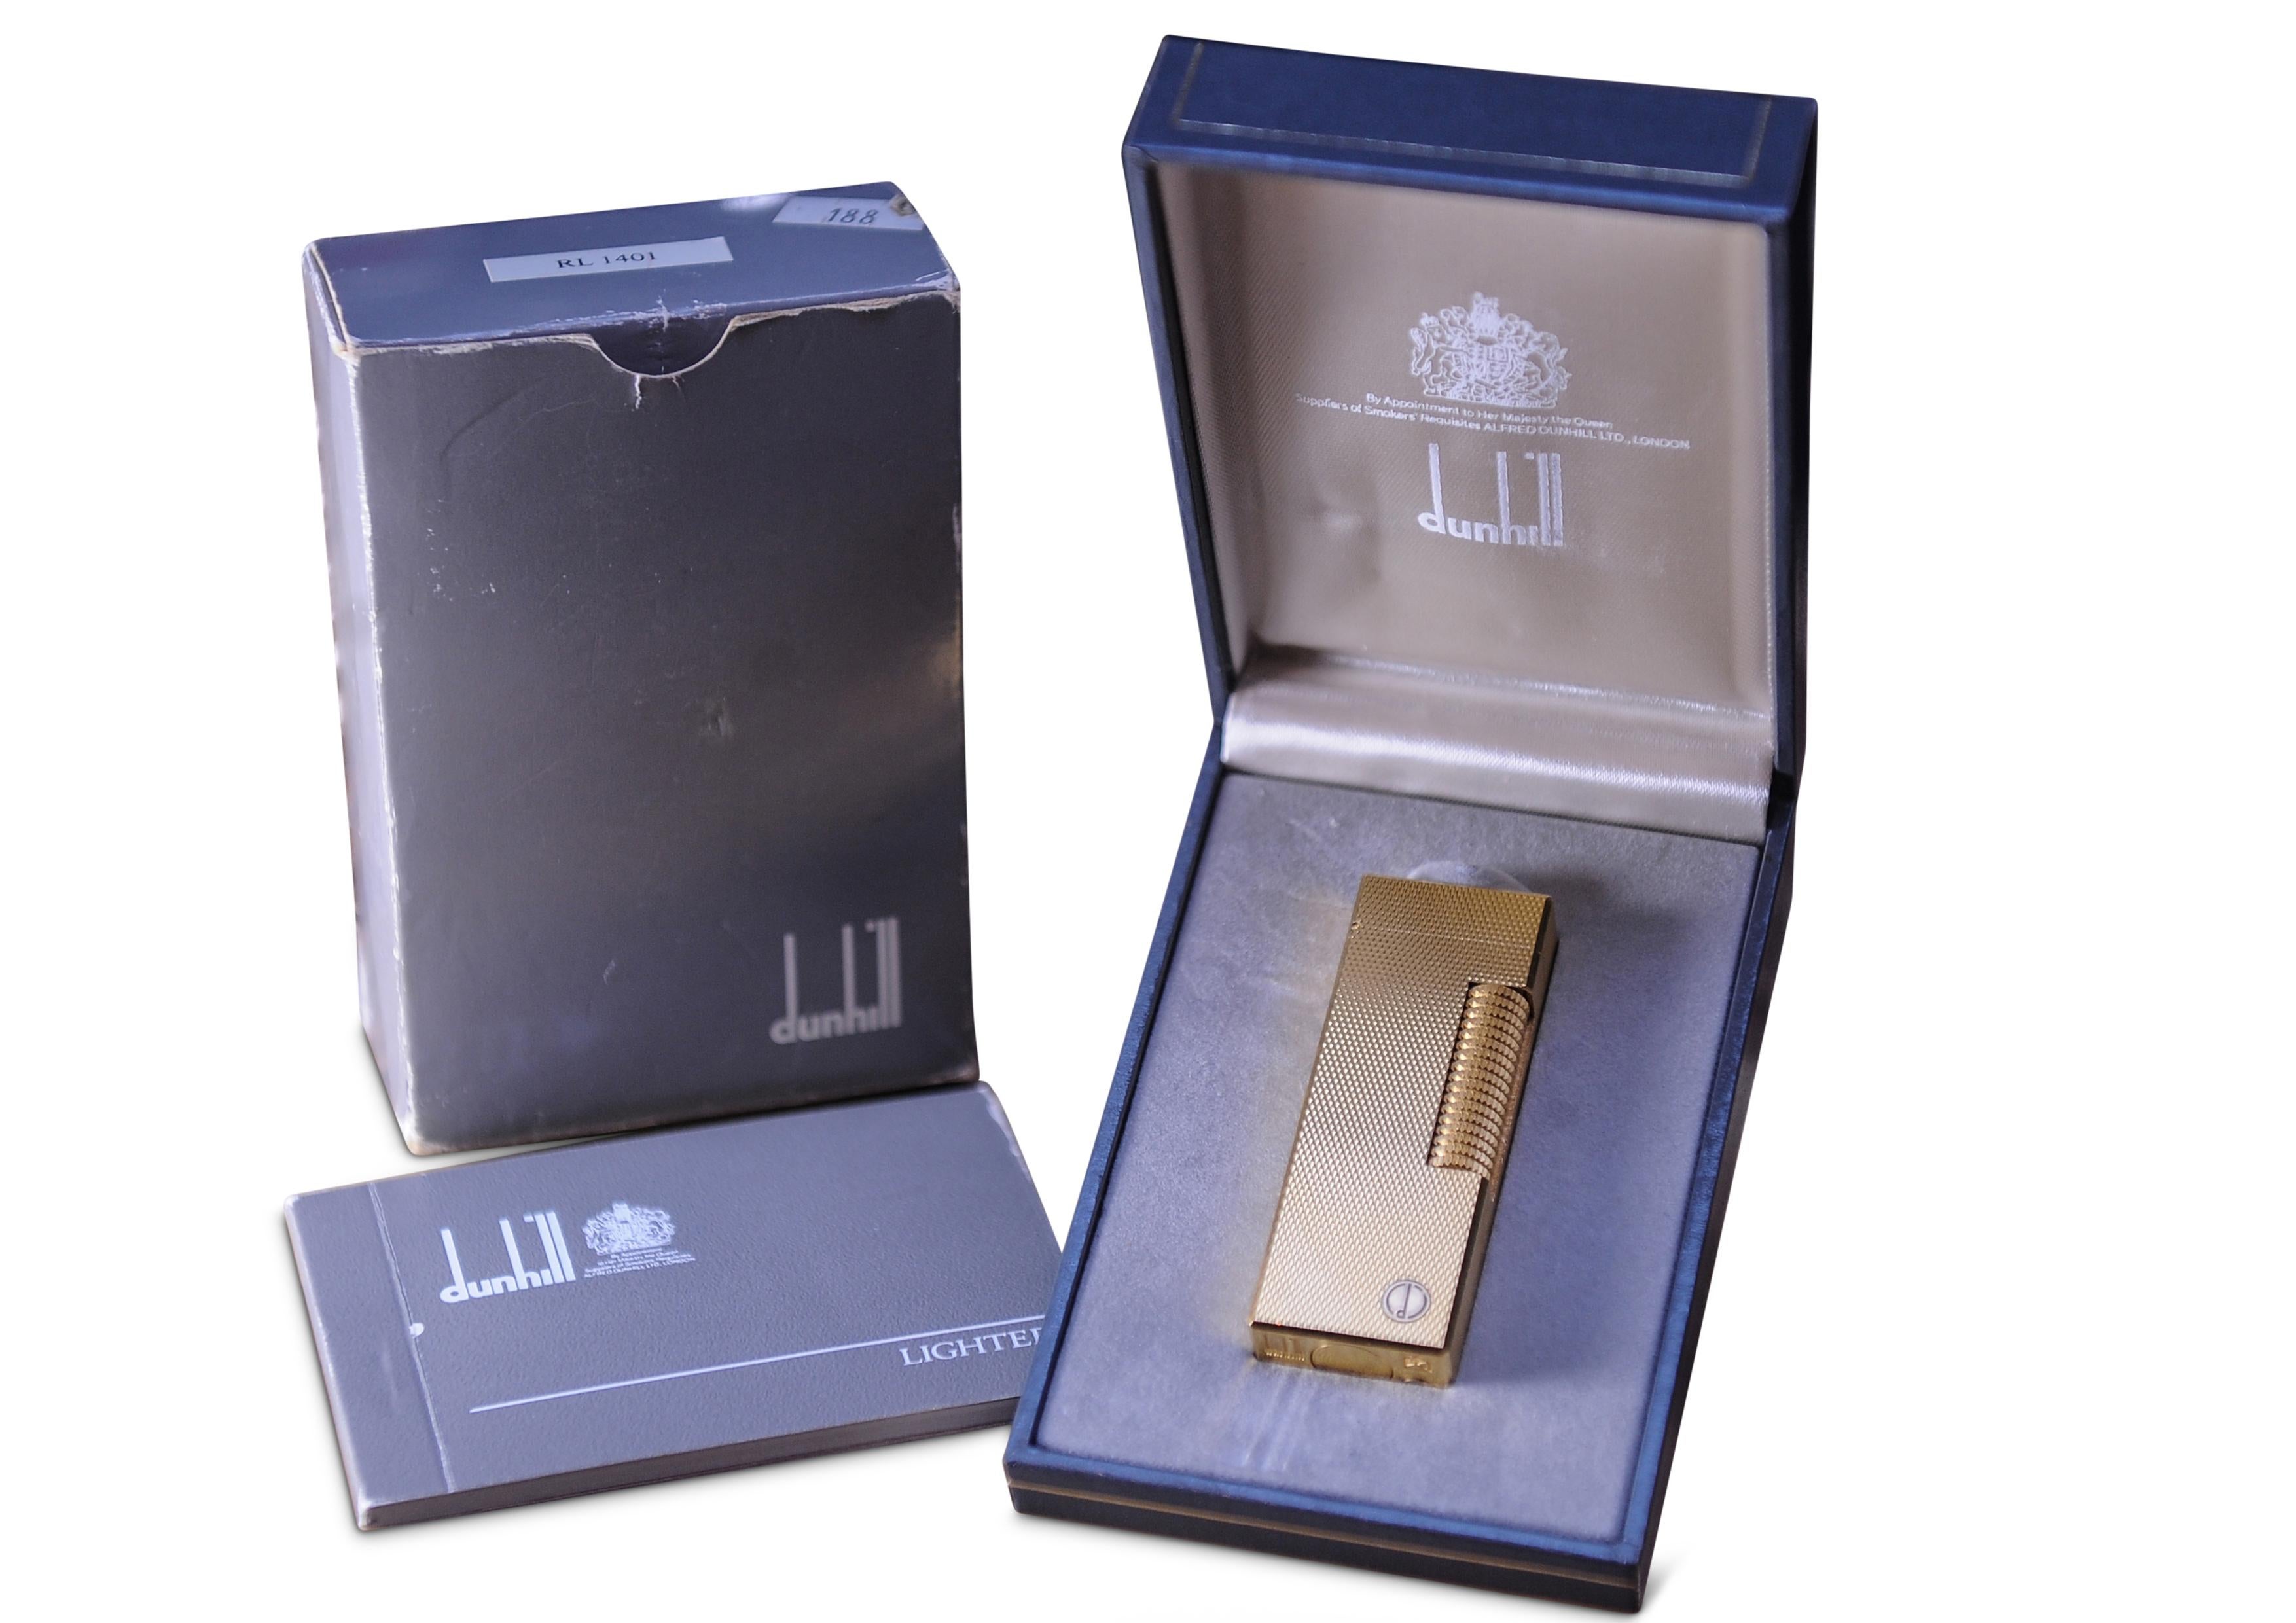 Alfred Dunhill Briquet Rollagas Cigarette Lighter

Vintage boxed Dunhill lighter with booklet stamped at purchase 1988
Stamped Dunhill and Swiss Made on base.

